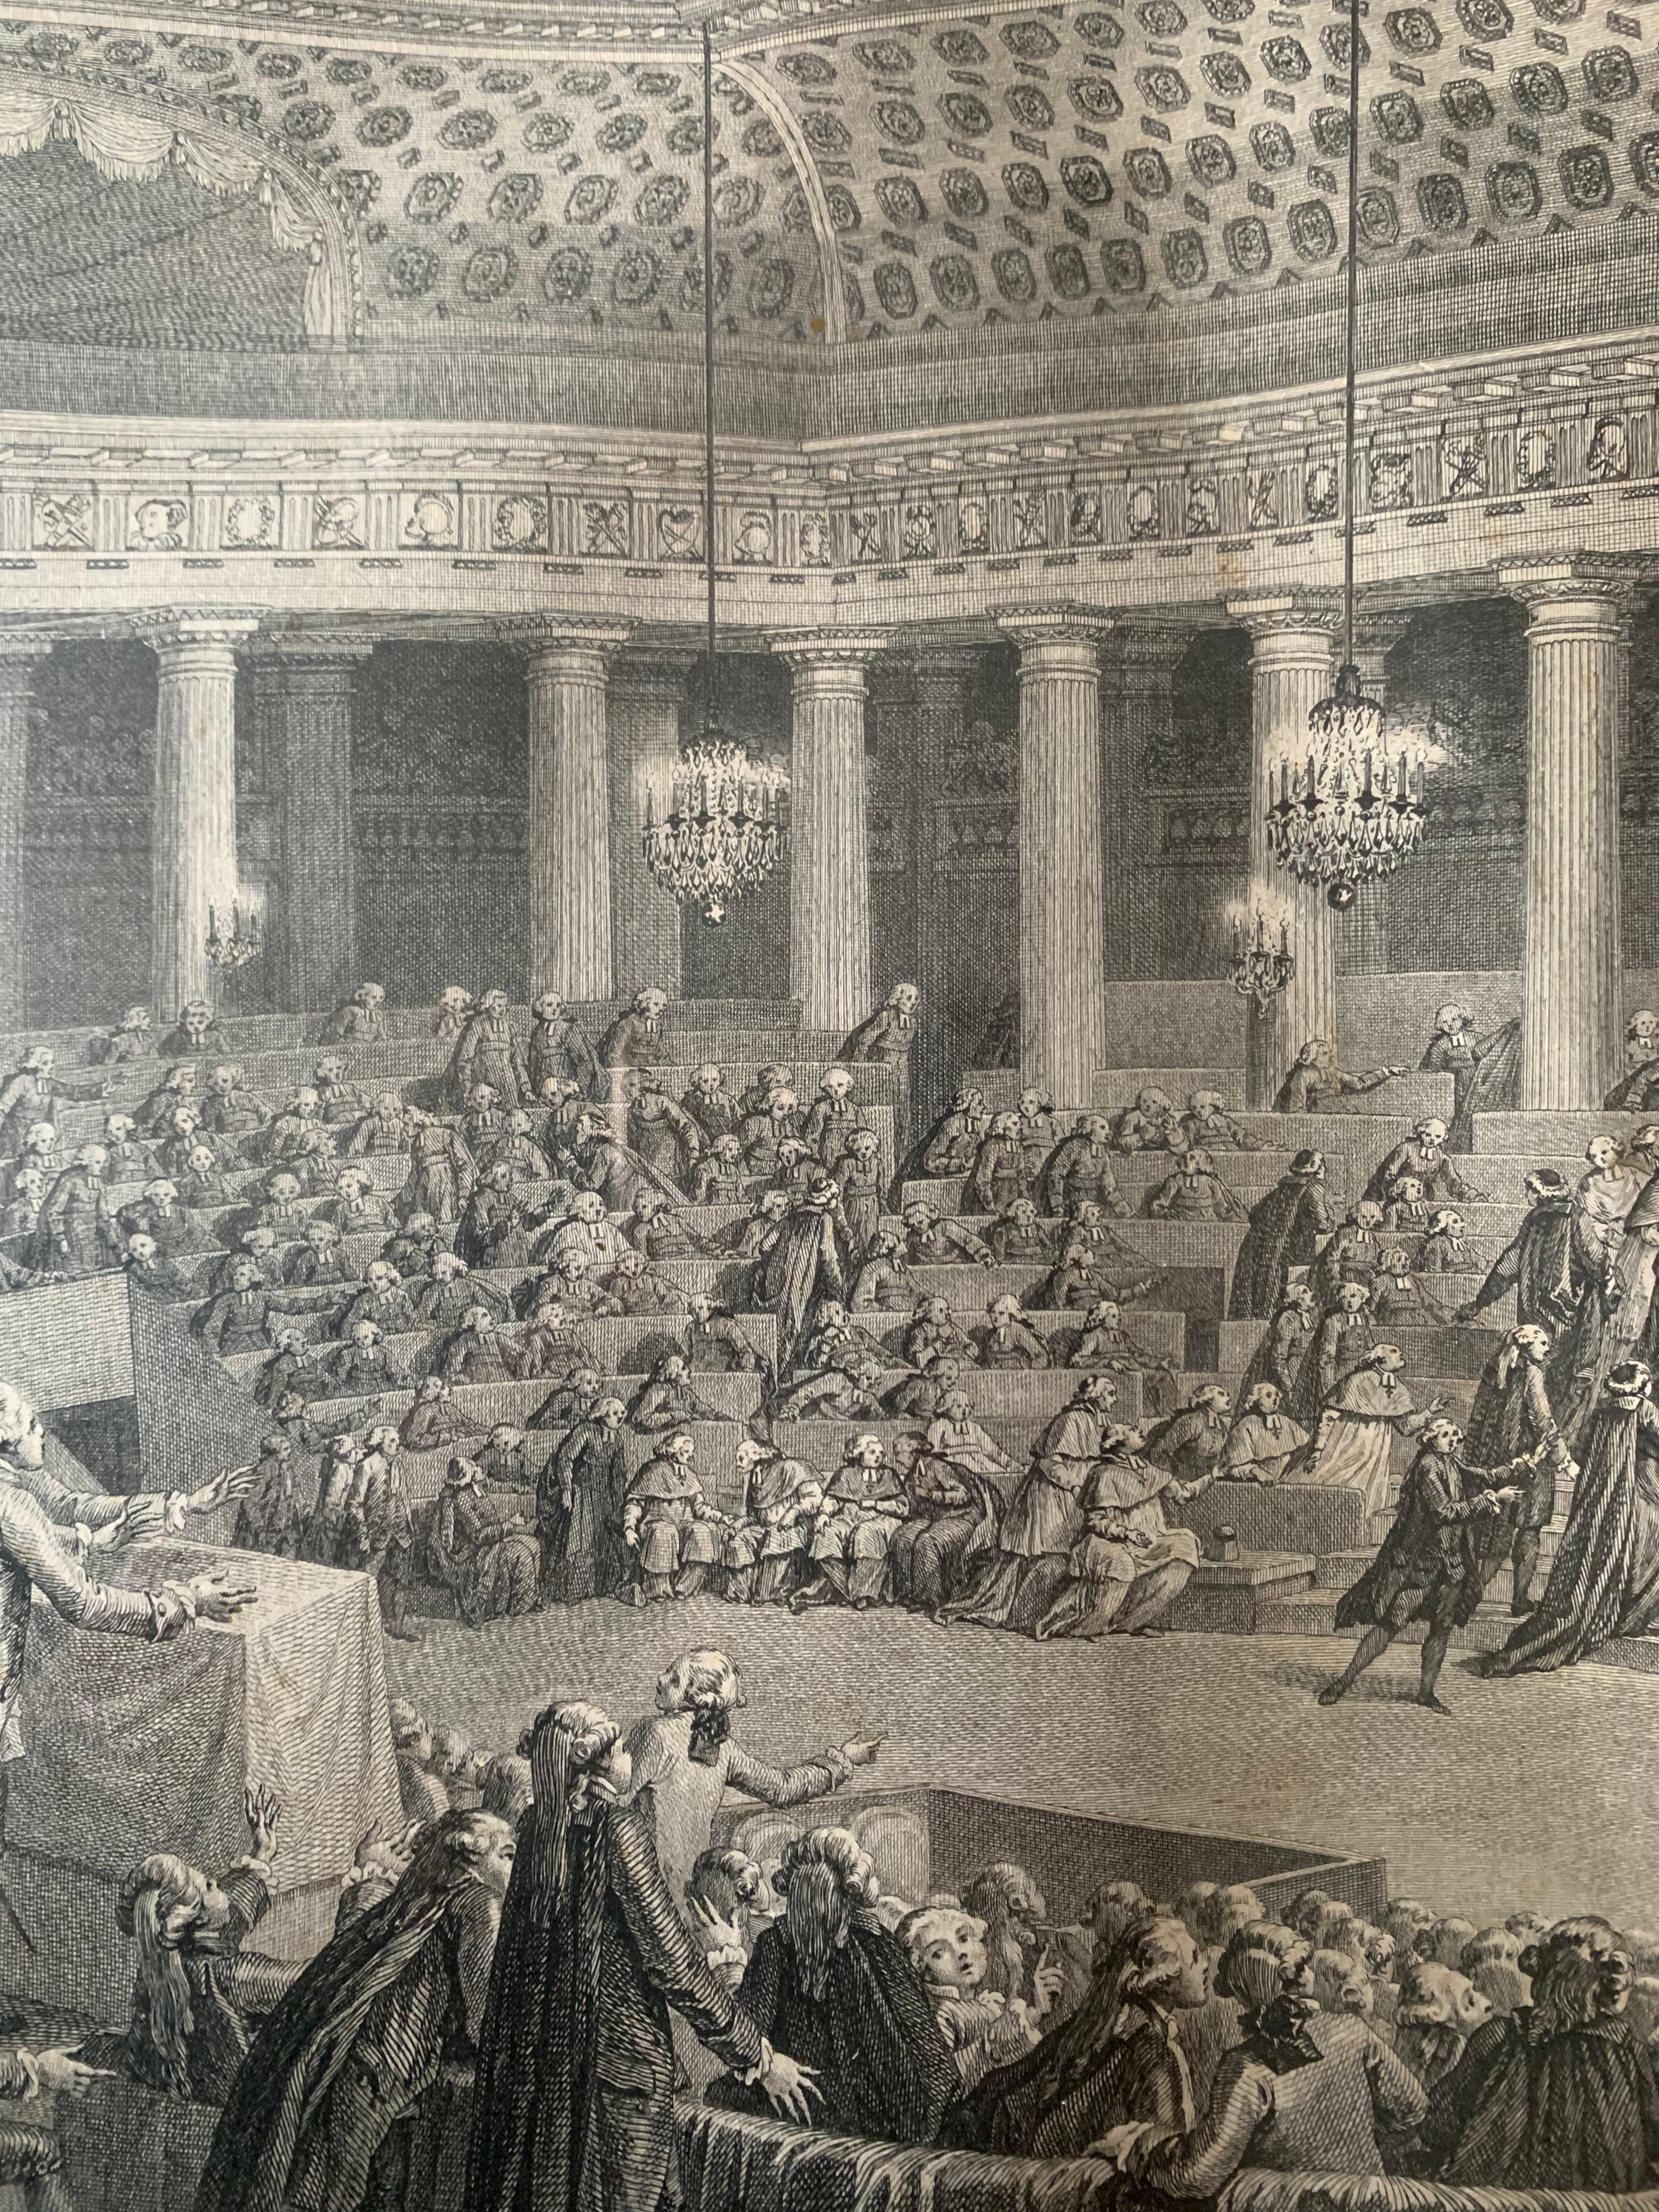 This engraving represents the National Assembly in the night of August 4 and 5, 1789 realized by Isodore Stanislas Herman after the work of Charles Monnet.It depicts the abandonment of privileges decided by the national assembly. This assembly was